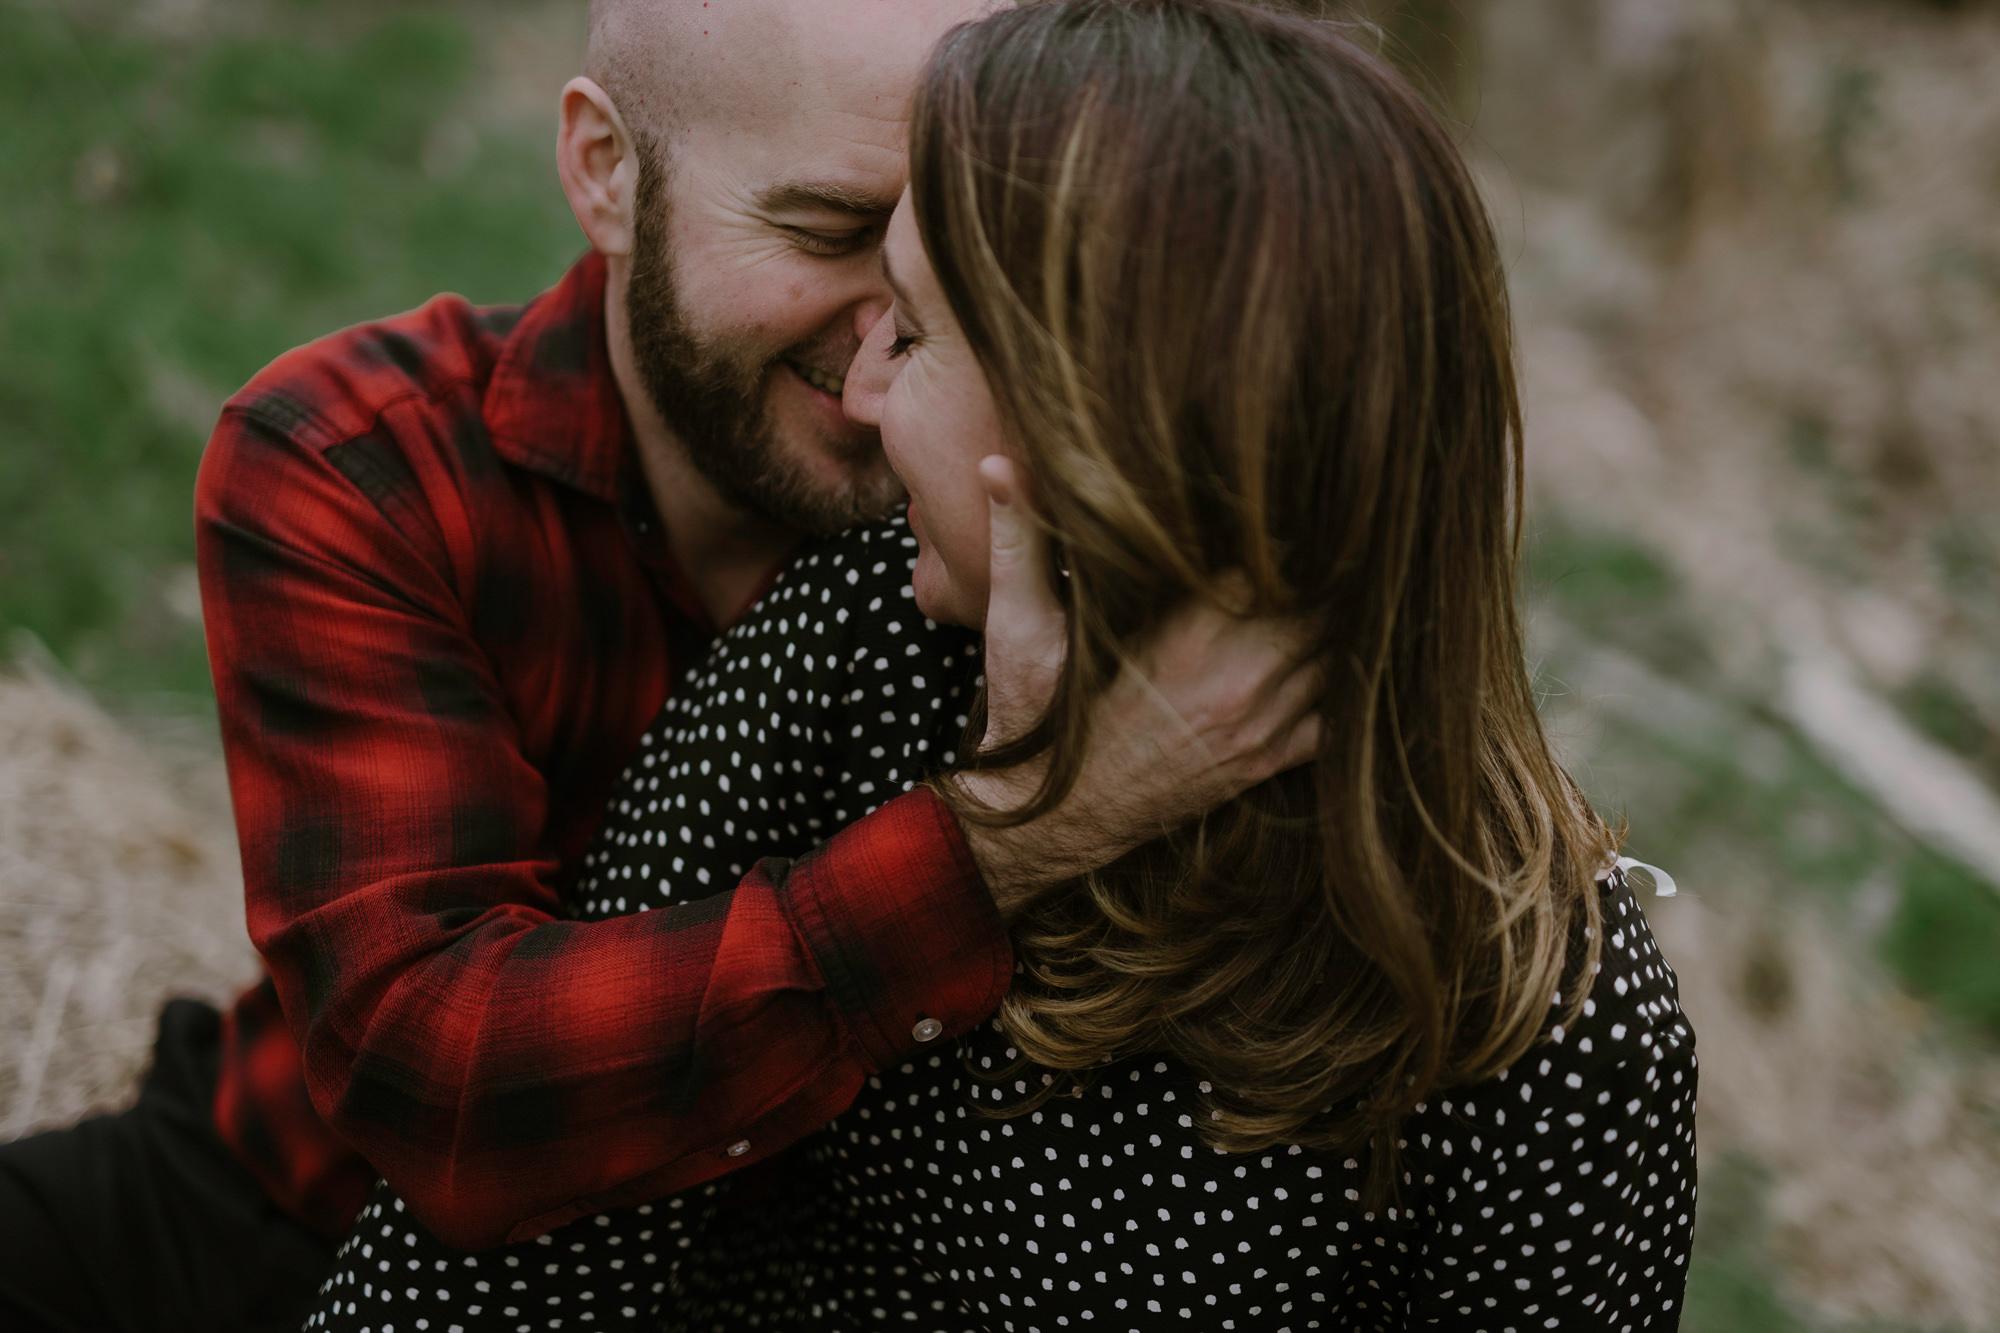 Eno State Park Engagement Session